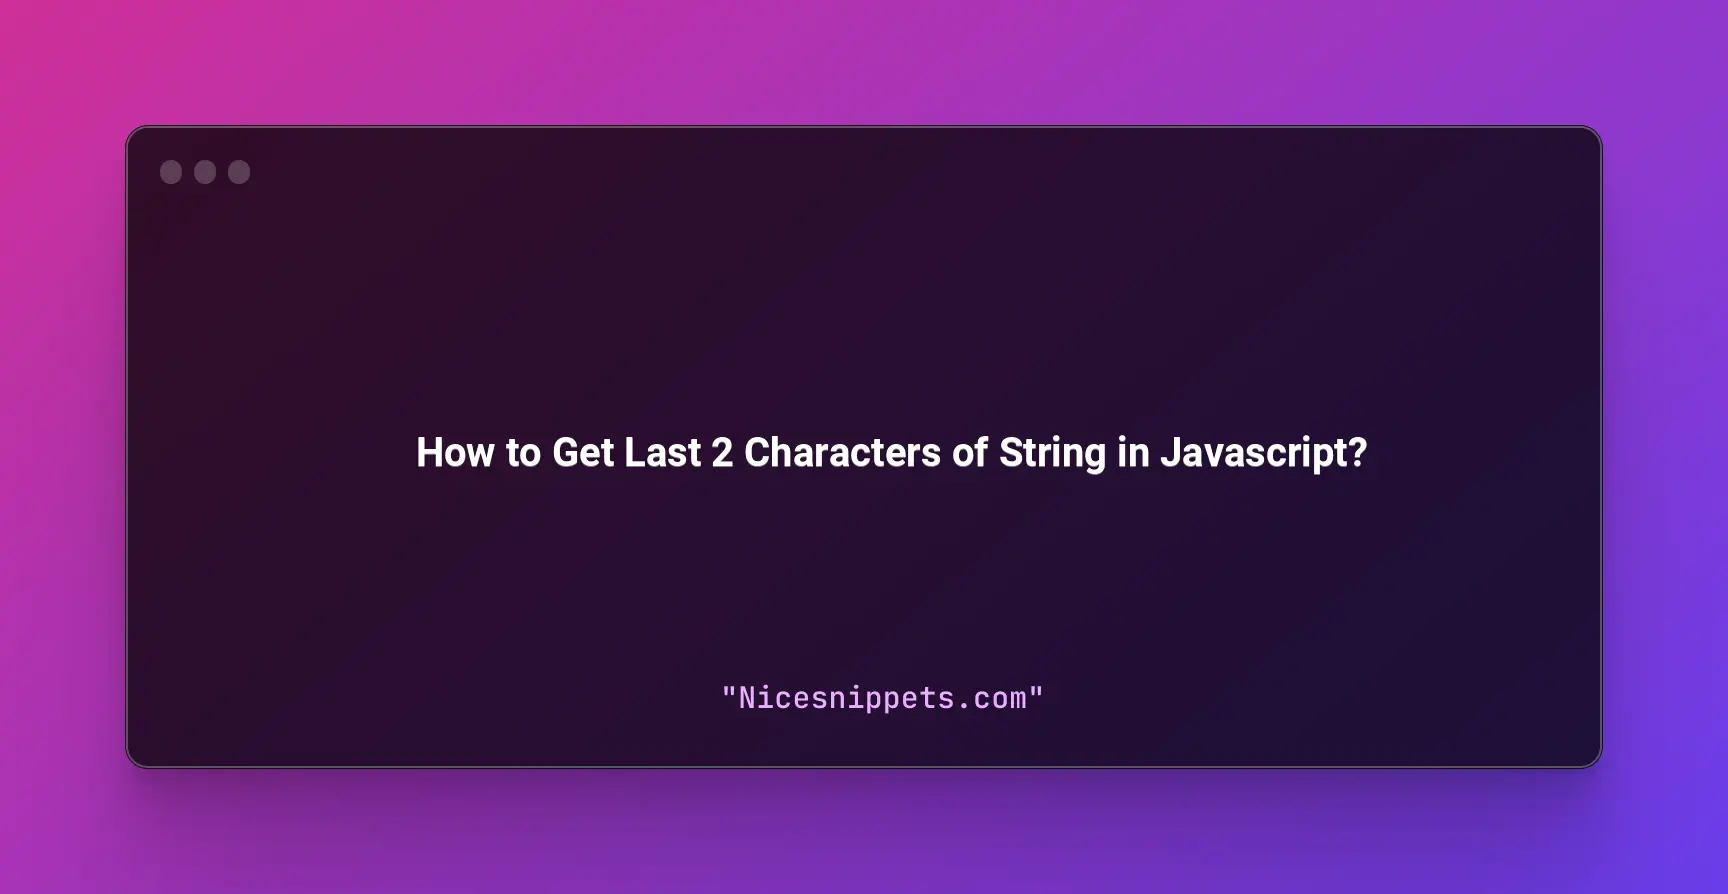 How to Get Last 2 Characters of String in Javascript?